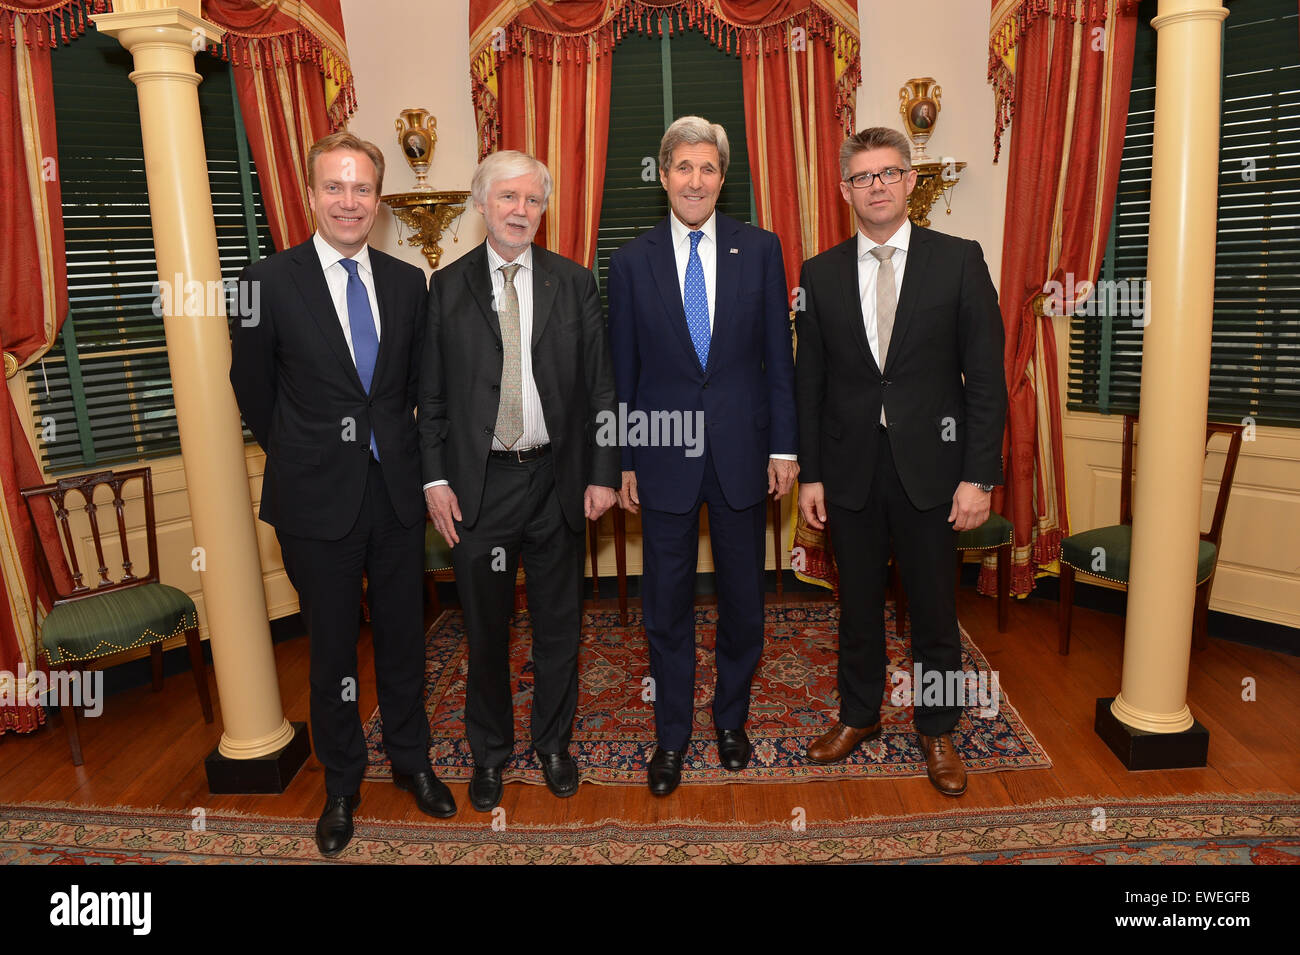 U.S. Secretary of State John Kerry poses for a photo with Norwegian Foreign Minister Borge Brende, Finnish Foreign Minister Erkki Tuomioja, and Icelandic Foreign Minister Gunnar Bragi Sveinsson before the U.S. Chairmanship of the Arctic Council reception at the U.S. Department of State in Washington, DC on May 21, 2015. Stock Photo